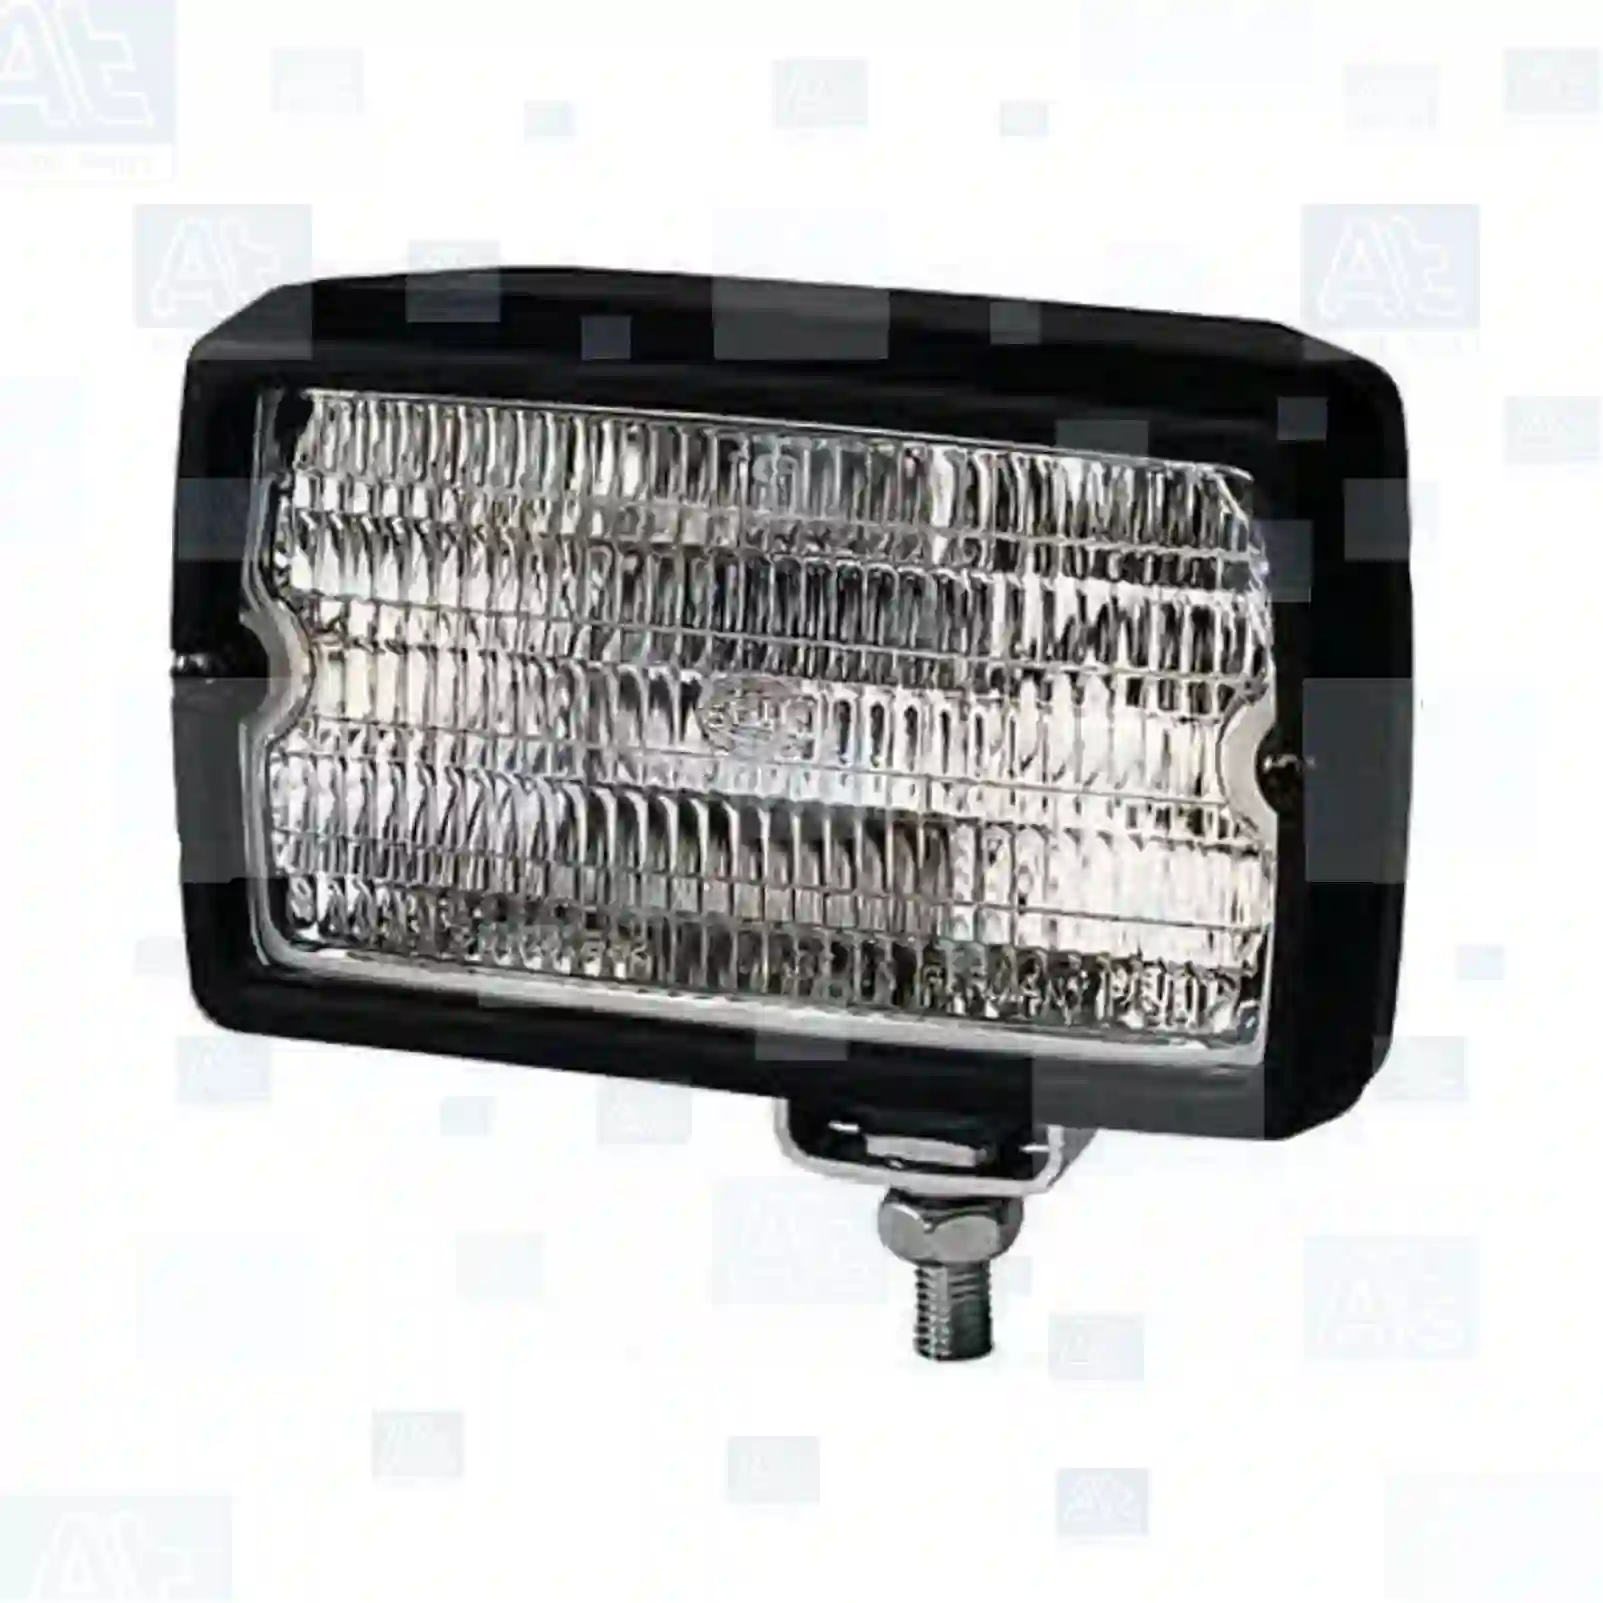 Work lamp, rear, without bulb, at no 77711639, oem no: 060502070, 140179002, 1401790021, 140179003, 1401790031, 1987491C2, 944019932, E46821, G841783, 199-3137, 0000148640, 0000746320, 55398240, 62150740, 63424440, 04391462, 04450666, 8176067, 4508470000000, G312900110010, G380902110010, G380902110020, 70/023000, 70/035200, 2100801, 6000804, 602709, 607149108, 81256, 9732200, 45084700, 0005441347, 0005451347, 1401790021, 1401790031, 1960077 At Spare Part | Engine, Accelerator Pedal, Camshaft, Connecting Rod, Crankcase, Crankshaft, Cylinder Head, Engine Suspension Mountings, Exhaust Manifold, Exhaust Gas Recirculation, Filter Kits, Flywheel Housing, General Overhaul Kits, Engine, Intake Manifold, Oil Cleaner, Oil Cooler, Oil Filter, Oil Pump, Oil Sump, Piston & Liner, Sensor & Switch, Timing Case, Turbocharger, Cooling System, Belt Tensioner, Coolant Filter, Coolant Pipe, Corrosion Prevention Agent, Drive, Expansion Tank, Fan, Intercooler, Monitors & Gauges, Radiator, Thermostat, V-Belt / Timing belt, Water Pump, Fuel System, Electronical Injector Unit, Feed Pump, Fuel Filter, cpl., Fuel Gauge Sender,  Fuel Line, Fuel Pump, Fuel Tank, Injection Line Kit, Injection Pump, Exhaust System, Clutch & Pedal, Gearbox, Propeller Shaft, Axles, Brake System, Hubs & Wheels, Suspension, Leaf Spring, Universal Parts / Accessories, Steering, Electrical System, Cabin Work lamp, rear, without bulb, at no 77711639, oem no: 060502070, 140179002, 1401790021, 140179003, 1401790031, 1987491C2, 944019932, E46821, G841783, 199-3137, 0000148640, 0000746320, 55398240, 62150740, 63424440, 04391462, 04450666, 8176067, 4508470000000, G312900110010, G380902110010, G380902110020, 70/023000, 70/035200, 2100801, 6000804, 602709, 607149108, 81256, 9732200, 45084700, 0005441347, 0005451347, 1401790021, 1401790031, 1960077 At Spare Part | Engine, Accelerator Pedal, Camshaft, Connecting Rod, Crankcase, Crankshaft, Cylinder Head, Engine Suspension Mountings, Exhaust Manifold, Exhaust Gas Recirculation, Filter Kits, Flywheel Housing, General Overhaul Kits, Engine, Intake Manifold, Oil Cleaner, Oil Cooler, Oil Filter, Oil Pump, Oil Sump, Piston & Liner, Sensor & Switch, Timing Case, Turbocharger, Cooling System, Belt Tensioner, Coolant Filter, Coolant Pipe, Corrosion Prevention Agent, Drive, Expansion Tank, Fan, Intercooler, Monitors & Gauges, Radiator, Thermostat, V-Belt / Timing belt, Water Pump, Fuel System, Electronical Injector Unit, Feed Pump, Fuel Filter, cpl., Fuel Gauge Sender,  Fuel Line, Fuel Pump, Fuel Tank, Injection Line Kit, Injection Pump, Exhaust System, Clutch & Pedal, Gearbox, Propeller Shaft, Axles, Brake System, Hubs & Wheels, Suspension, Leaf Spring, Universal Parts / Accessories, Steering, Electrical System, Cabin